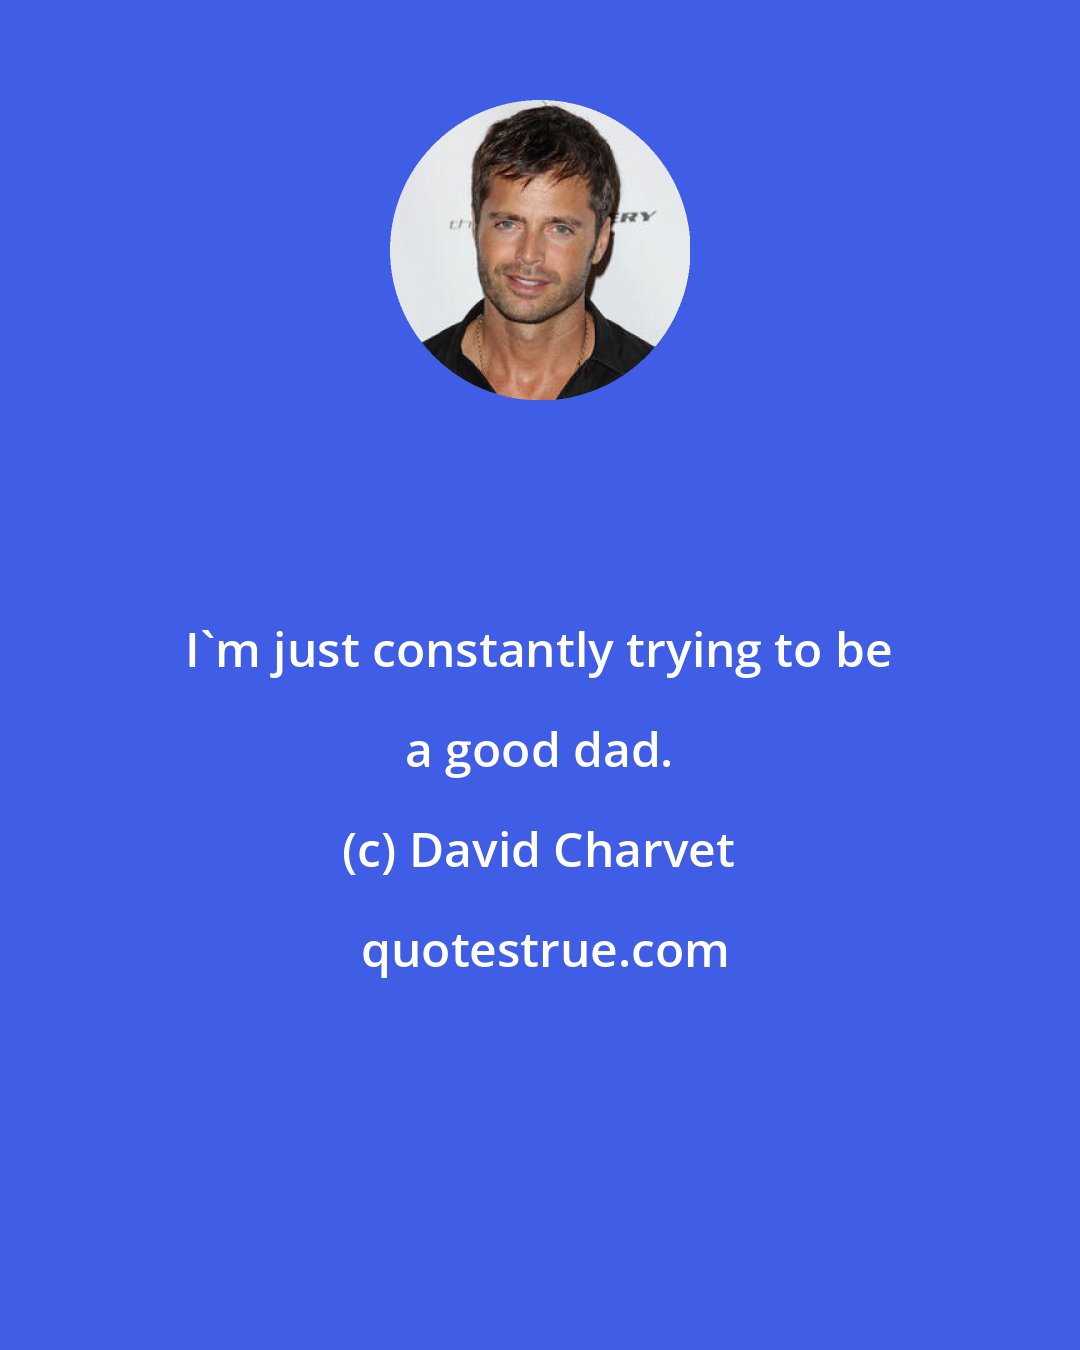 David Charvet: I'm just constantly trying to be a good dad.